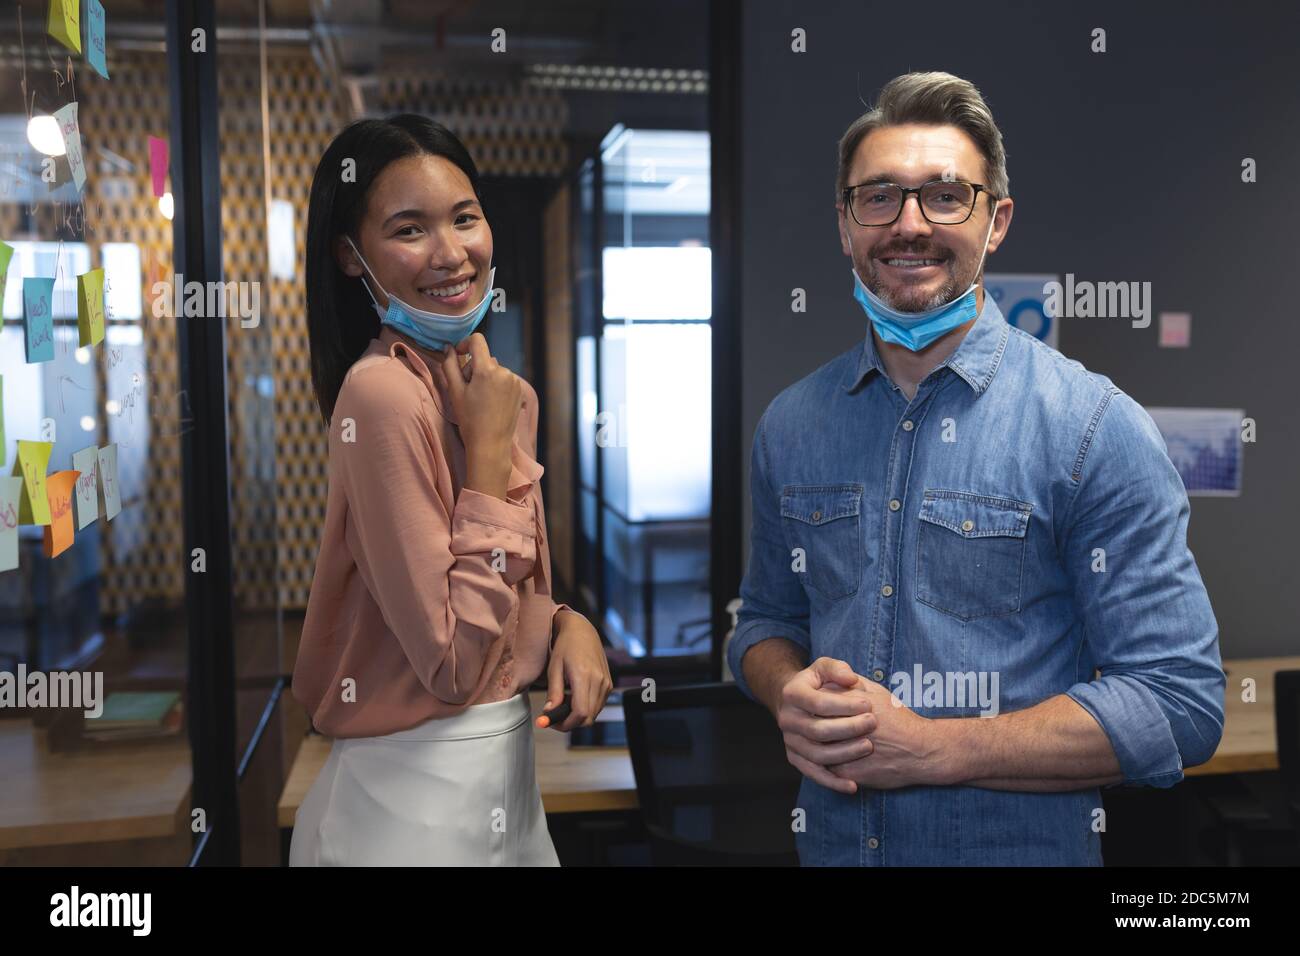 Portrait of caucasian man and asian woman with face masks around their neck smiling while standing i Stock Photo